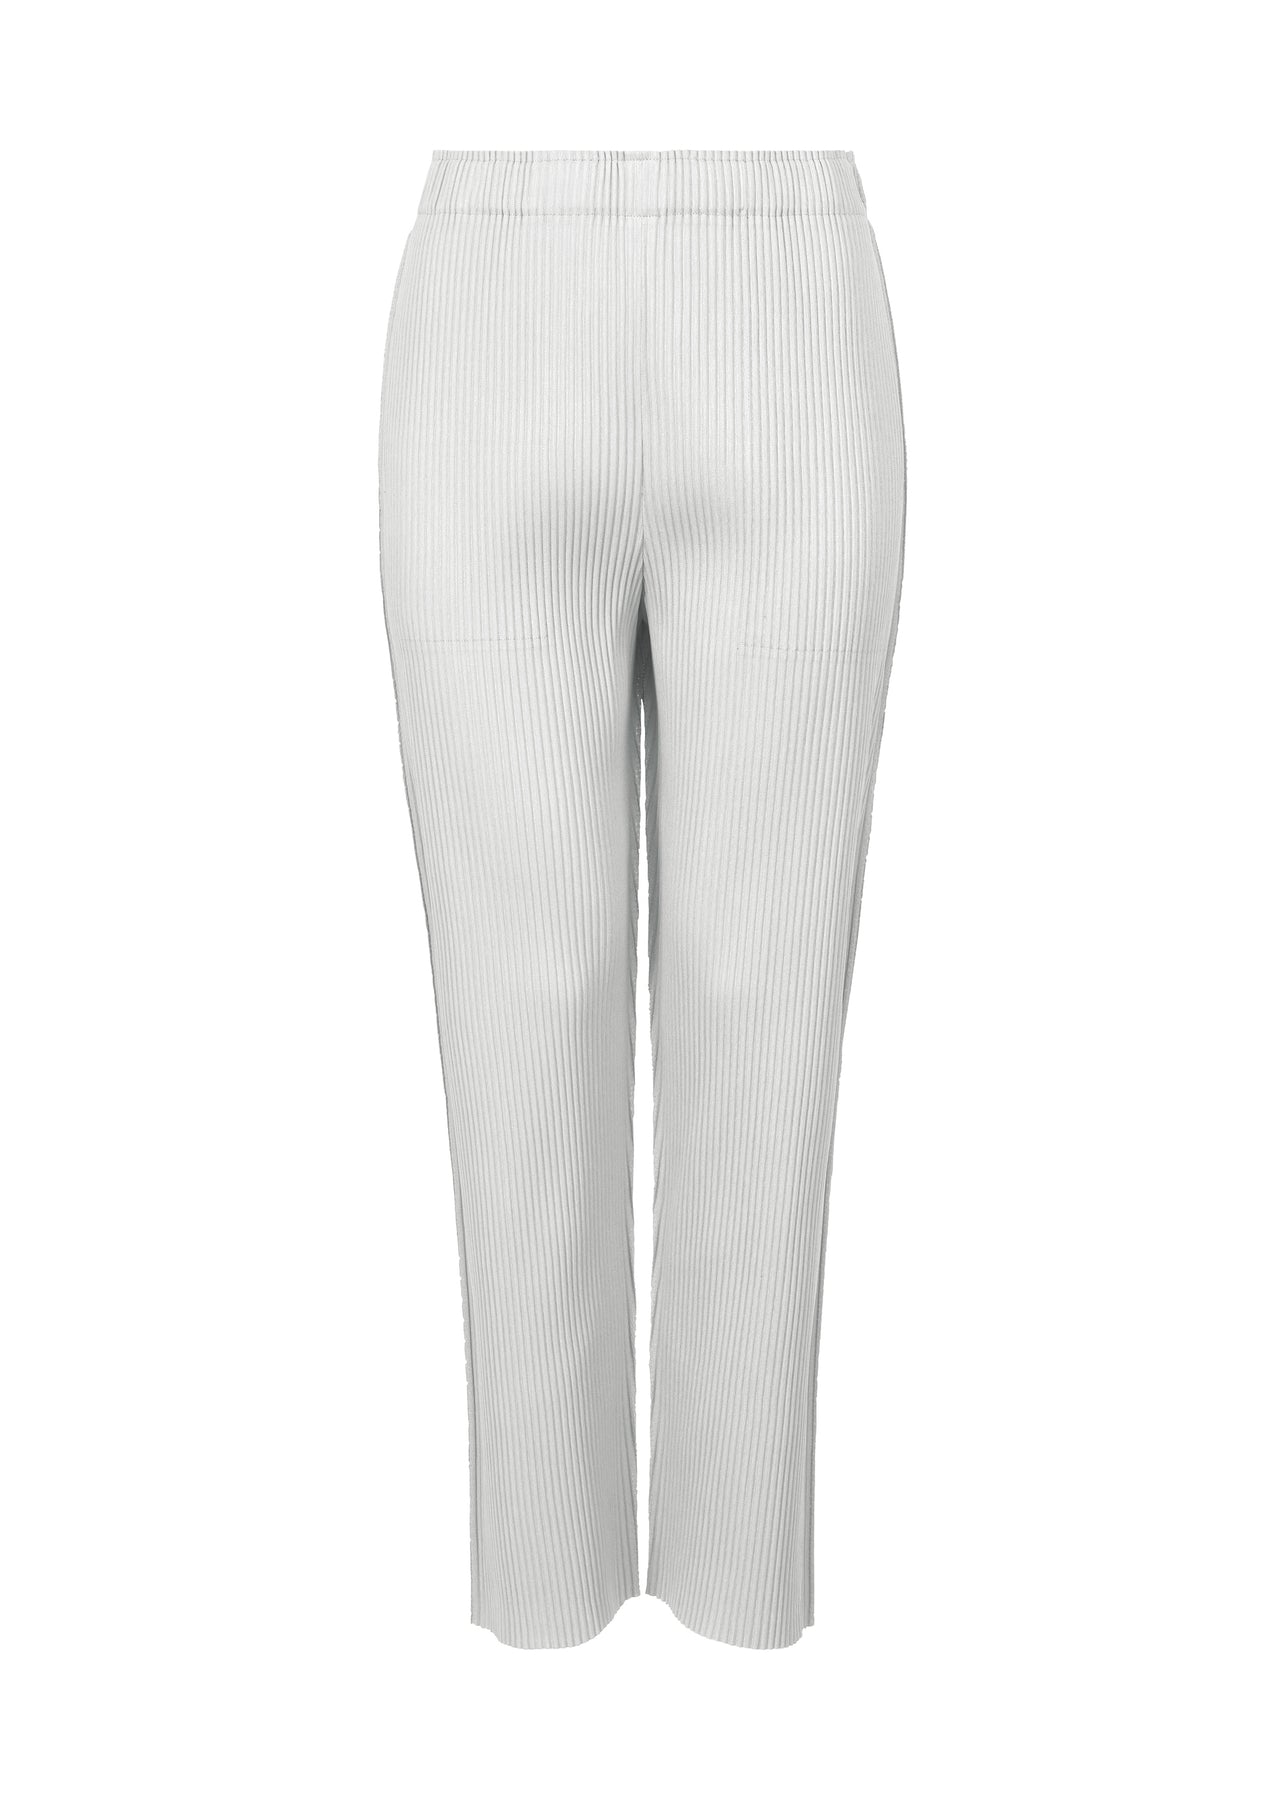 MIX FINE KNIT PLEATS BOTTOMS | The official ISSEY MIYAKE ONLINE 